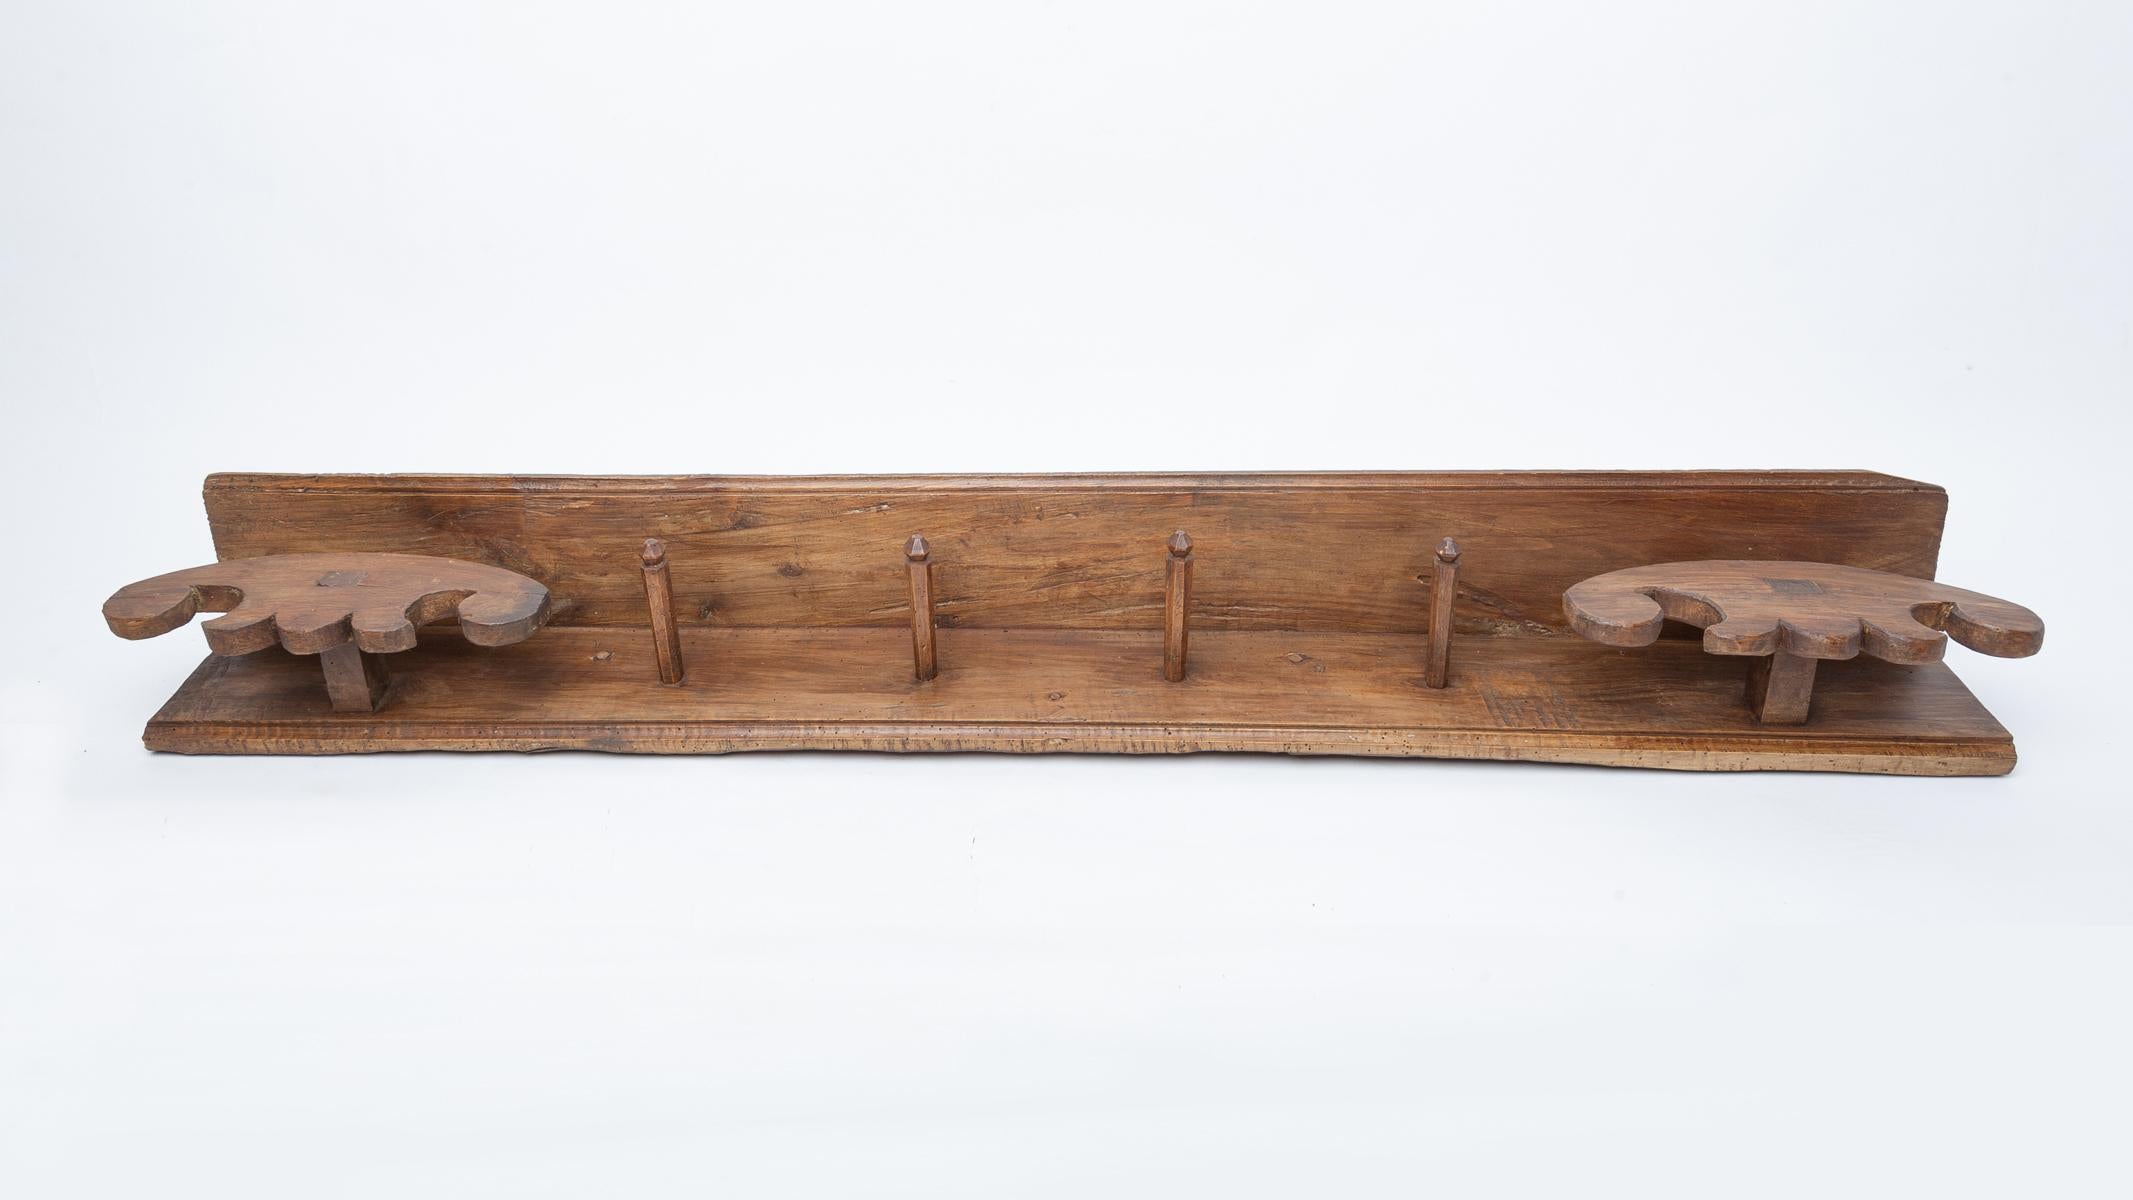 M/1719 - An antique wall coat wood rack found many years ago in an old home-cabin on the mountains near lake Maggiore.  It's simple and useful and reminds me of my grandparents' country house.
The upper part was used to place caps and gloves.